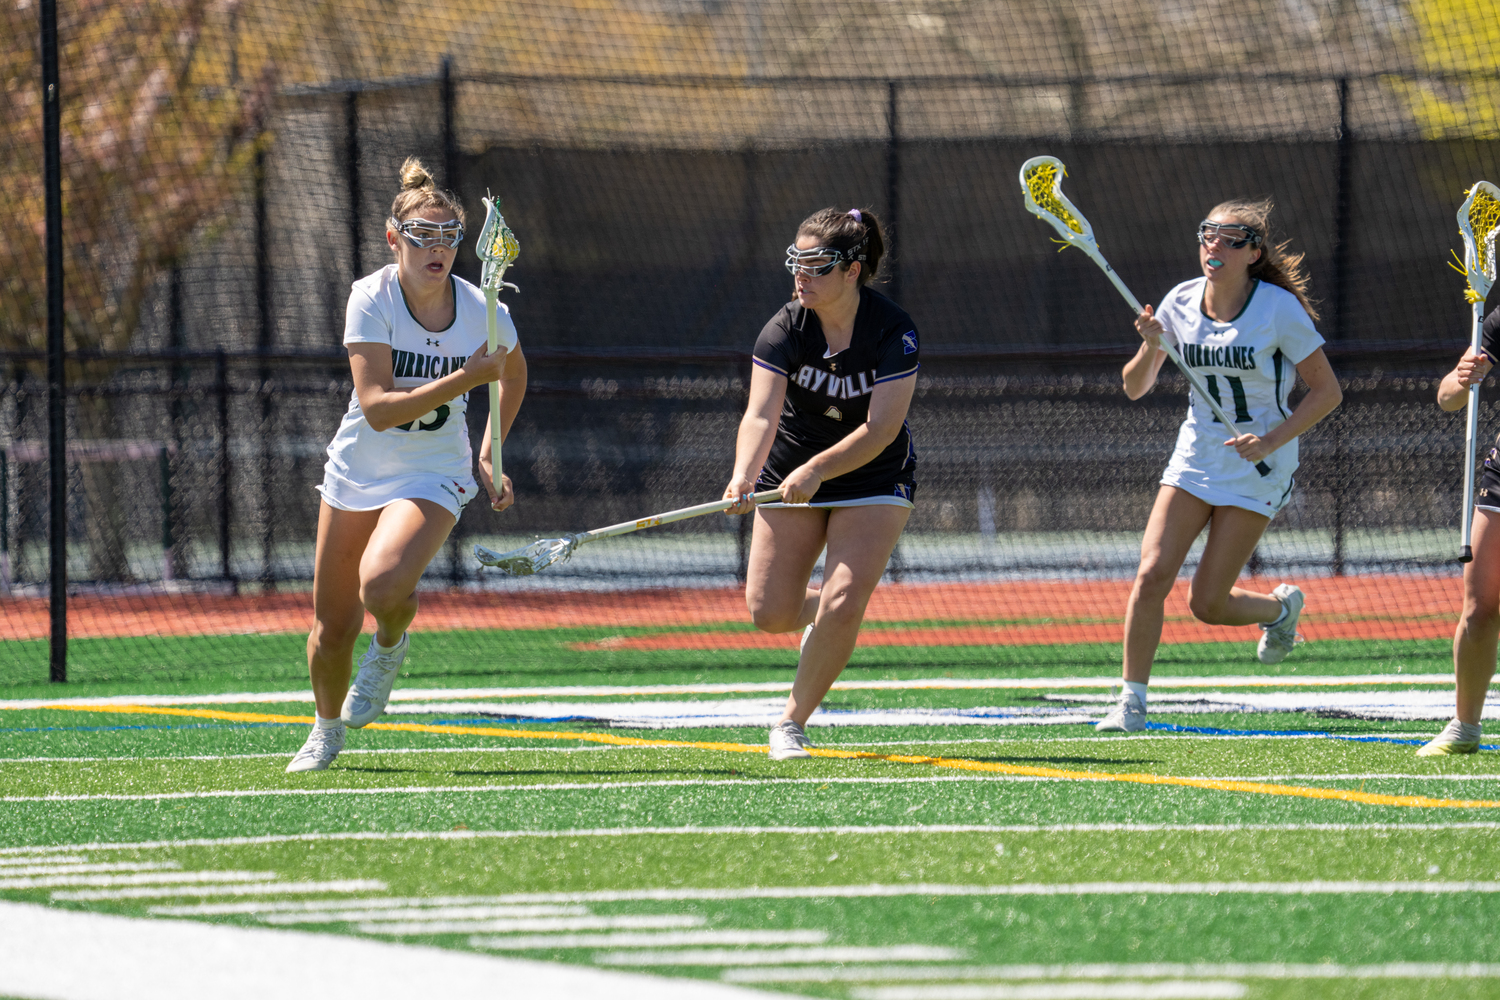 Senior midfielder Katie Lanning carries the ball up the field during a 9-5 loss to Sayville on April 26. RON ESPOSITO